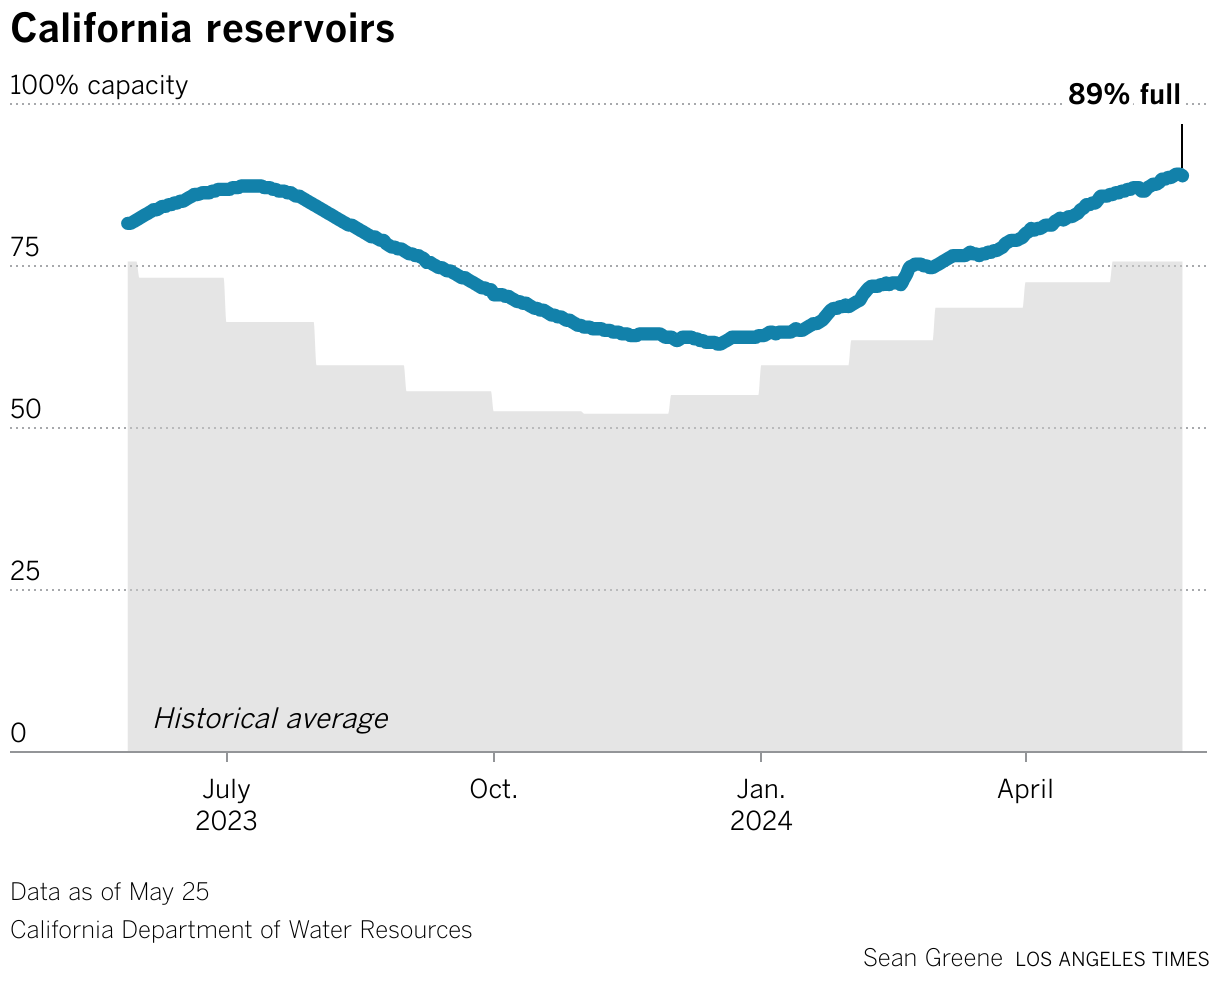 California reservoirs's storage capacity is 116% of average for this month.